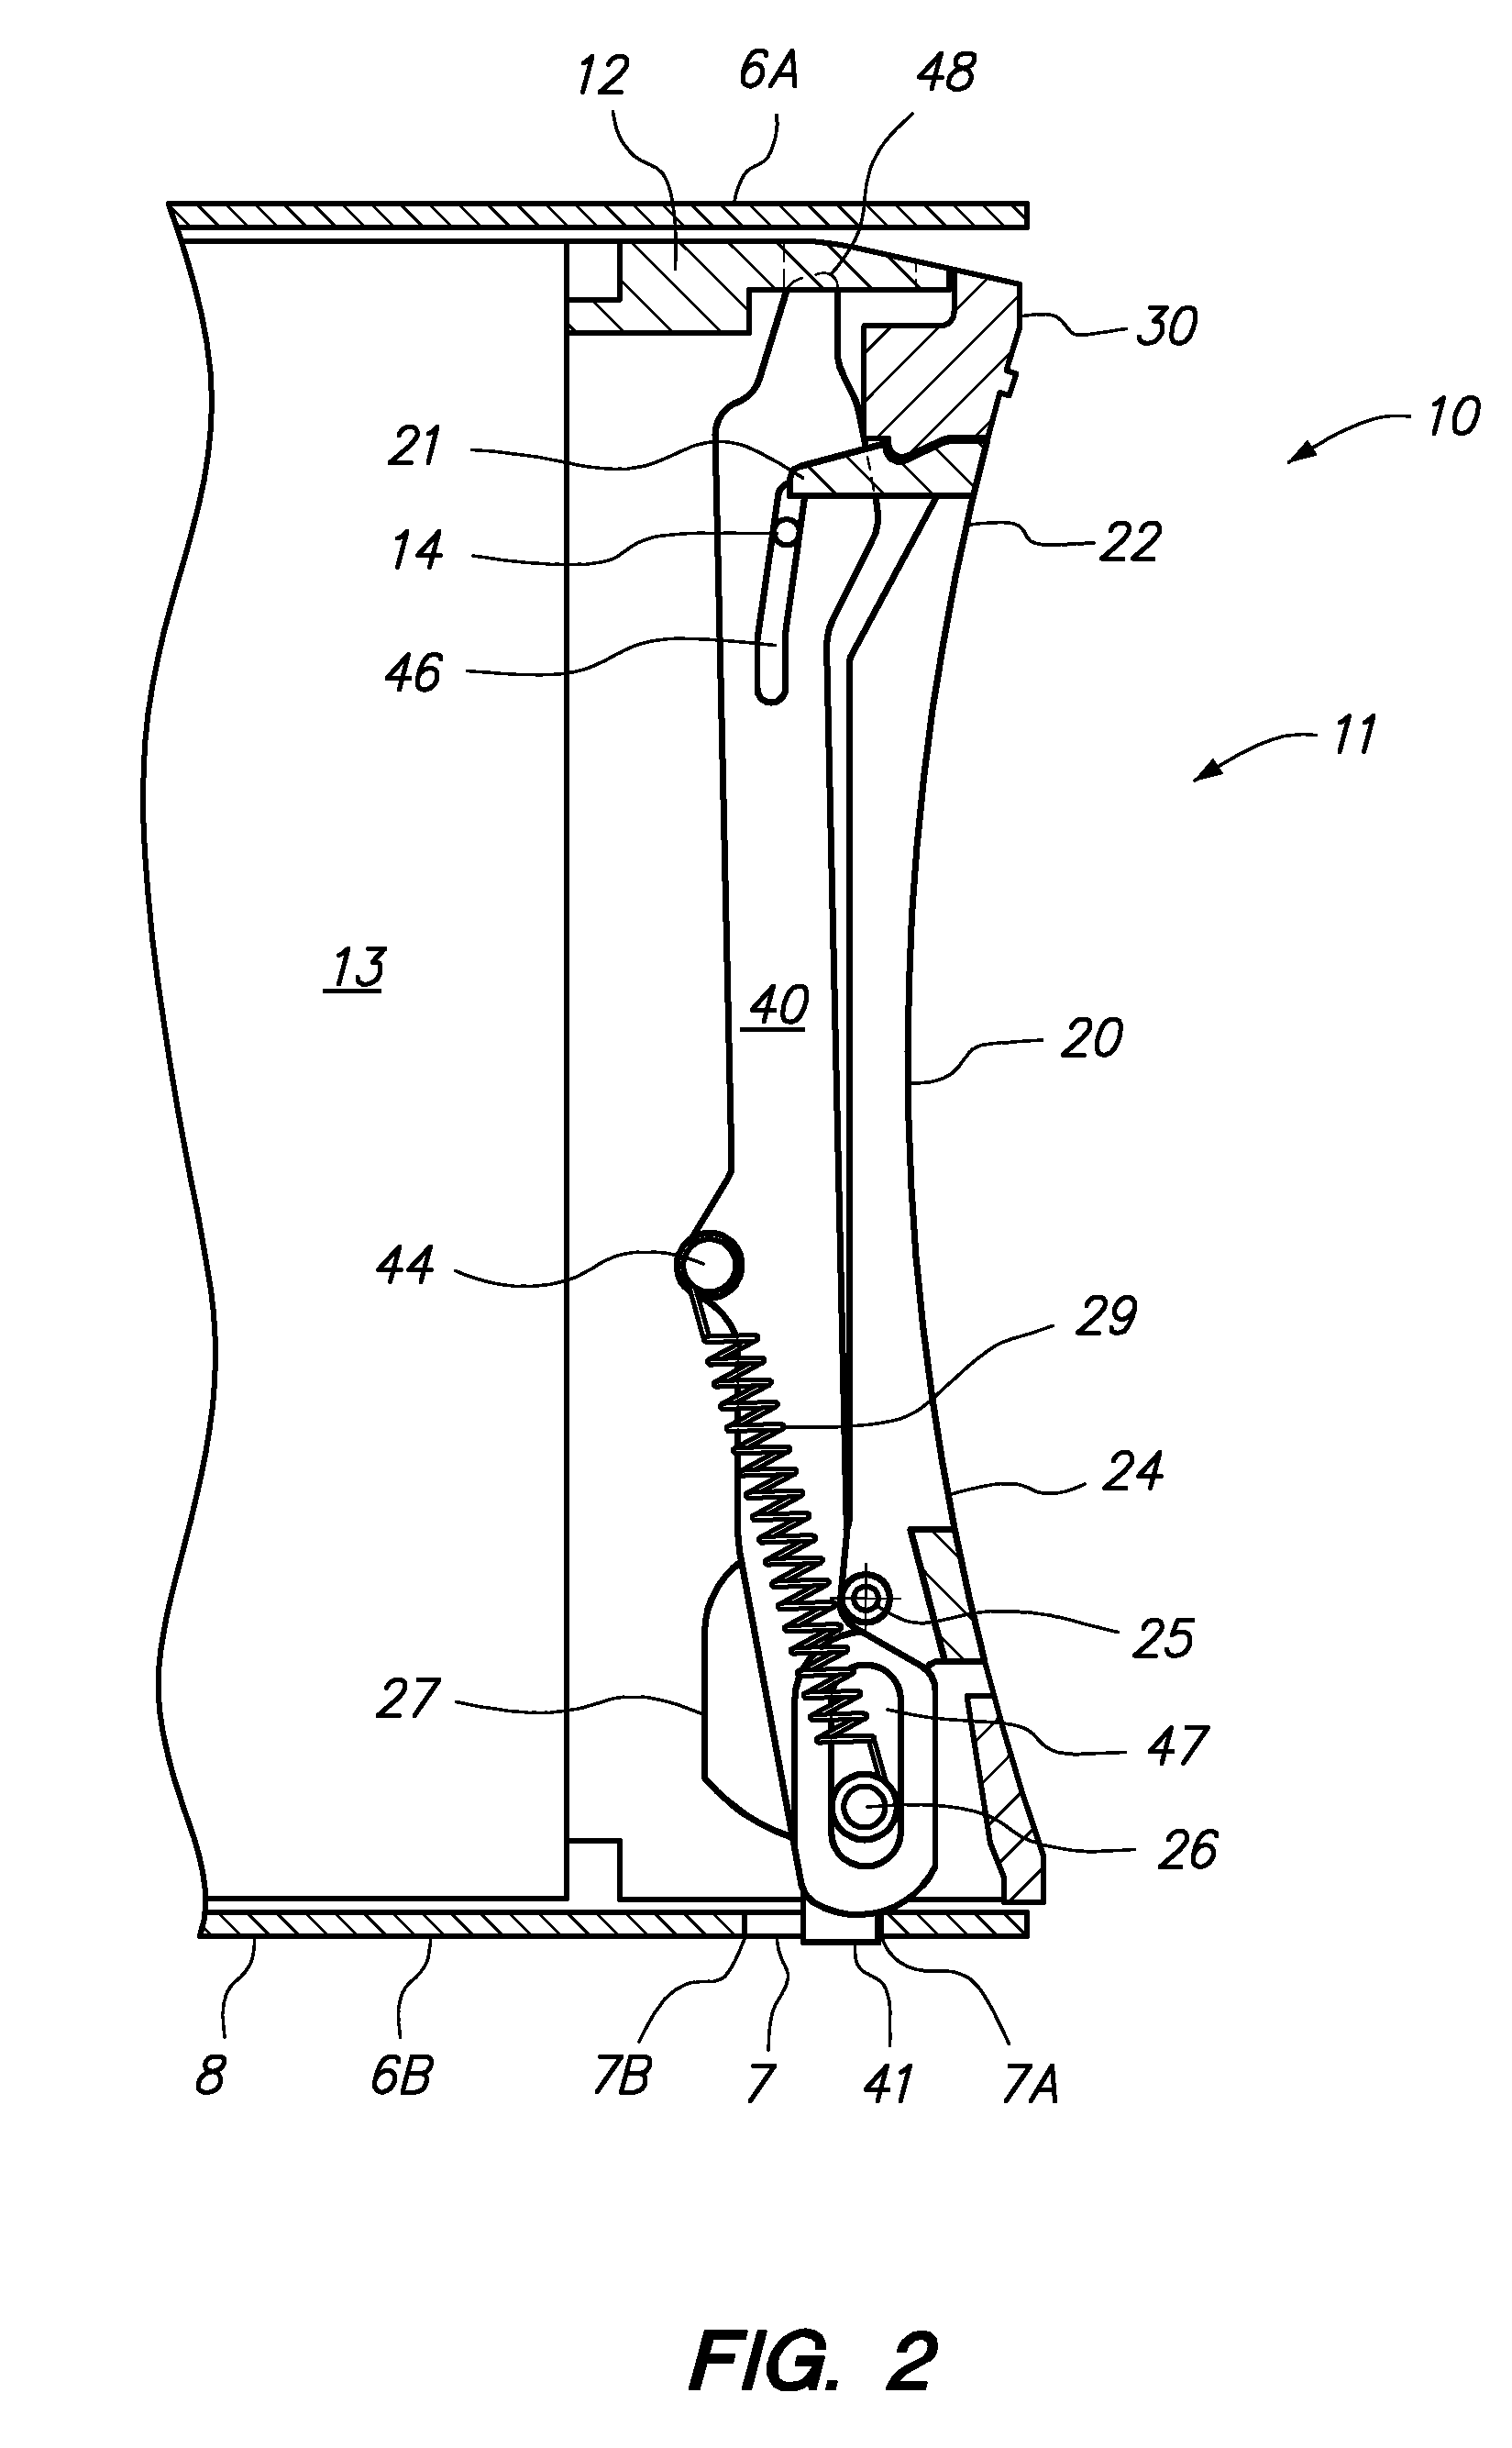 Hard disk drive carrier latch apparatus